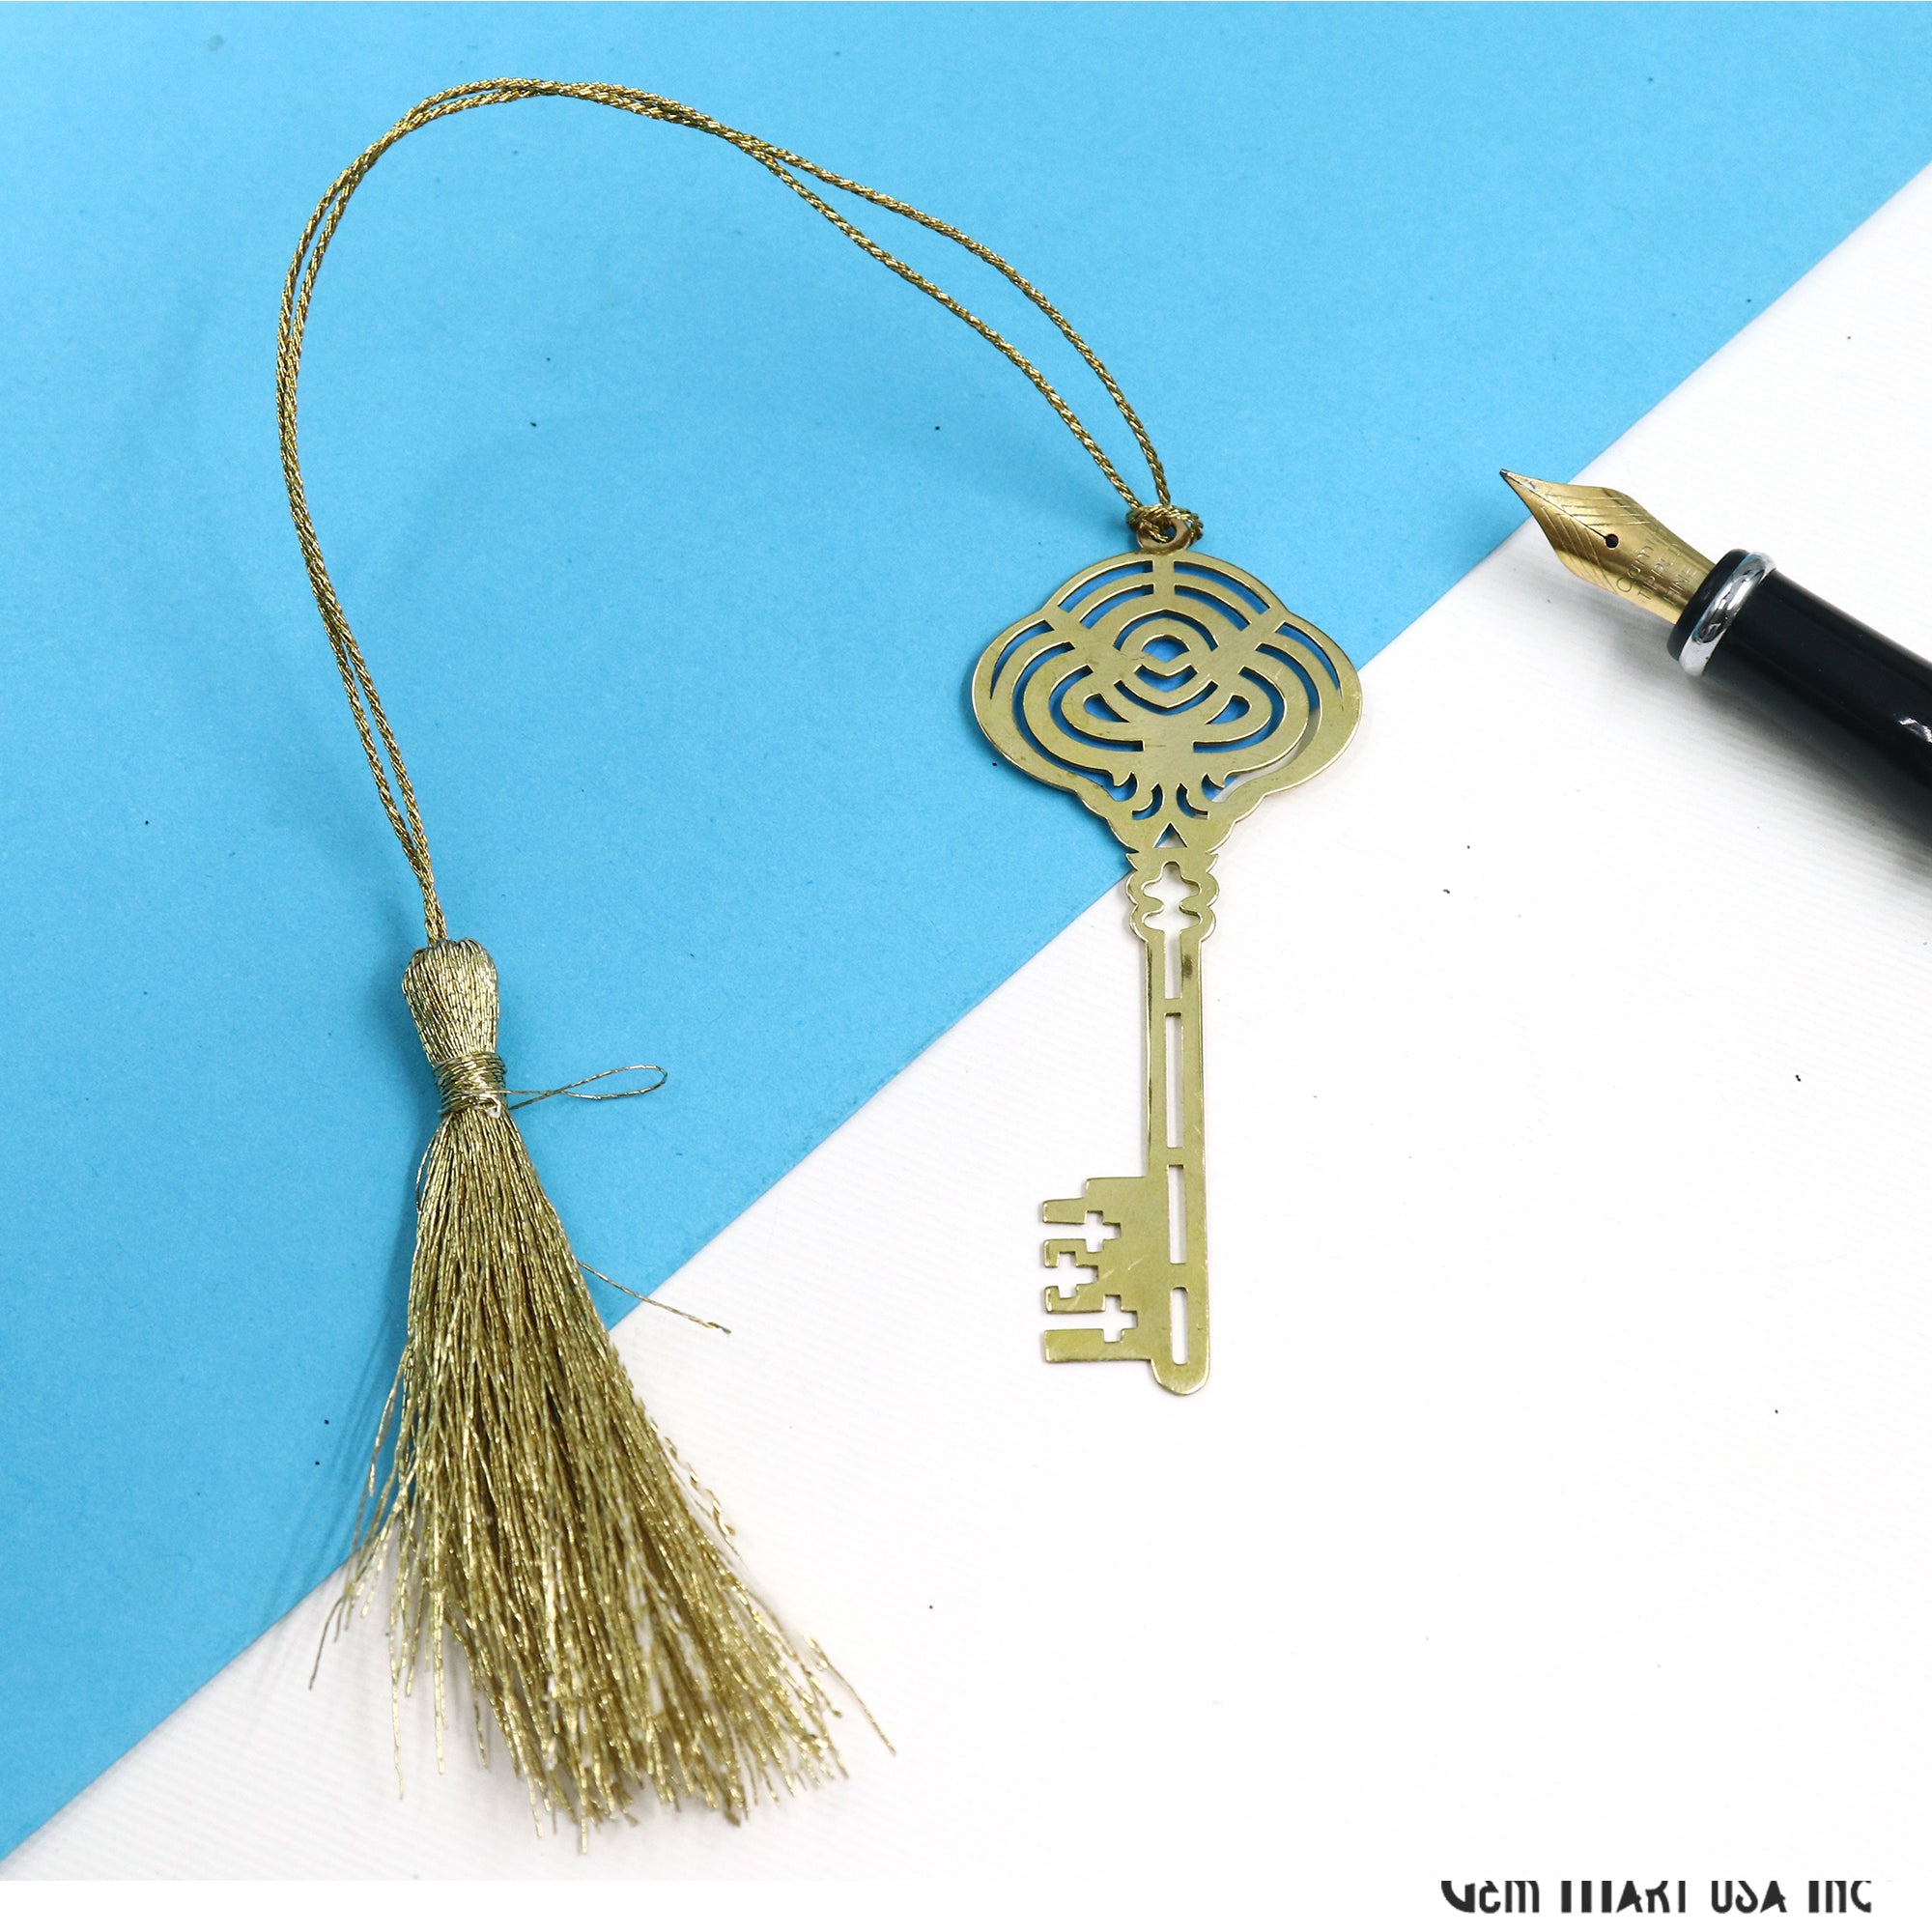 Metal Bookmark, Gold Plated Brass Bookmark, Bookmark with Tassel,  Handcrafted, 1 pc, GemMartUSA (BOOK)